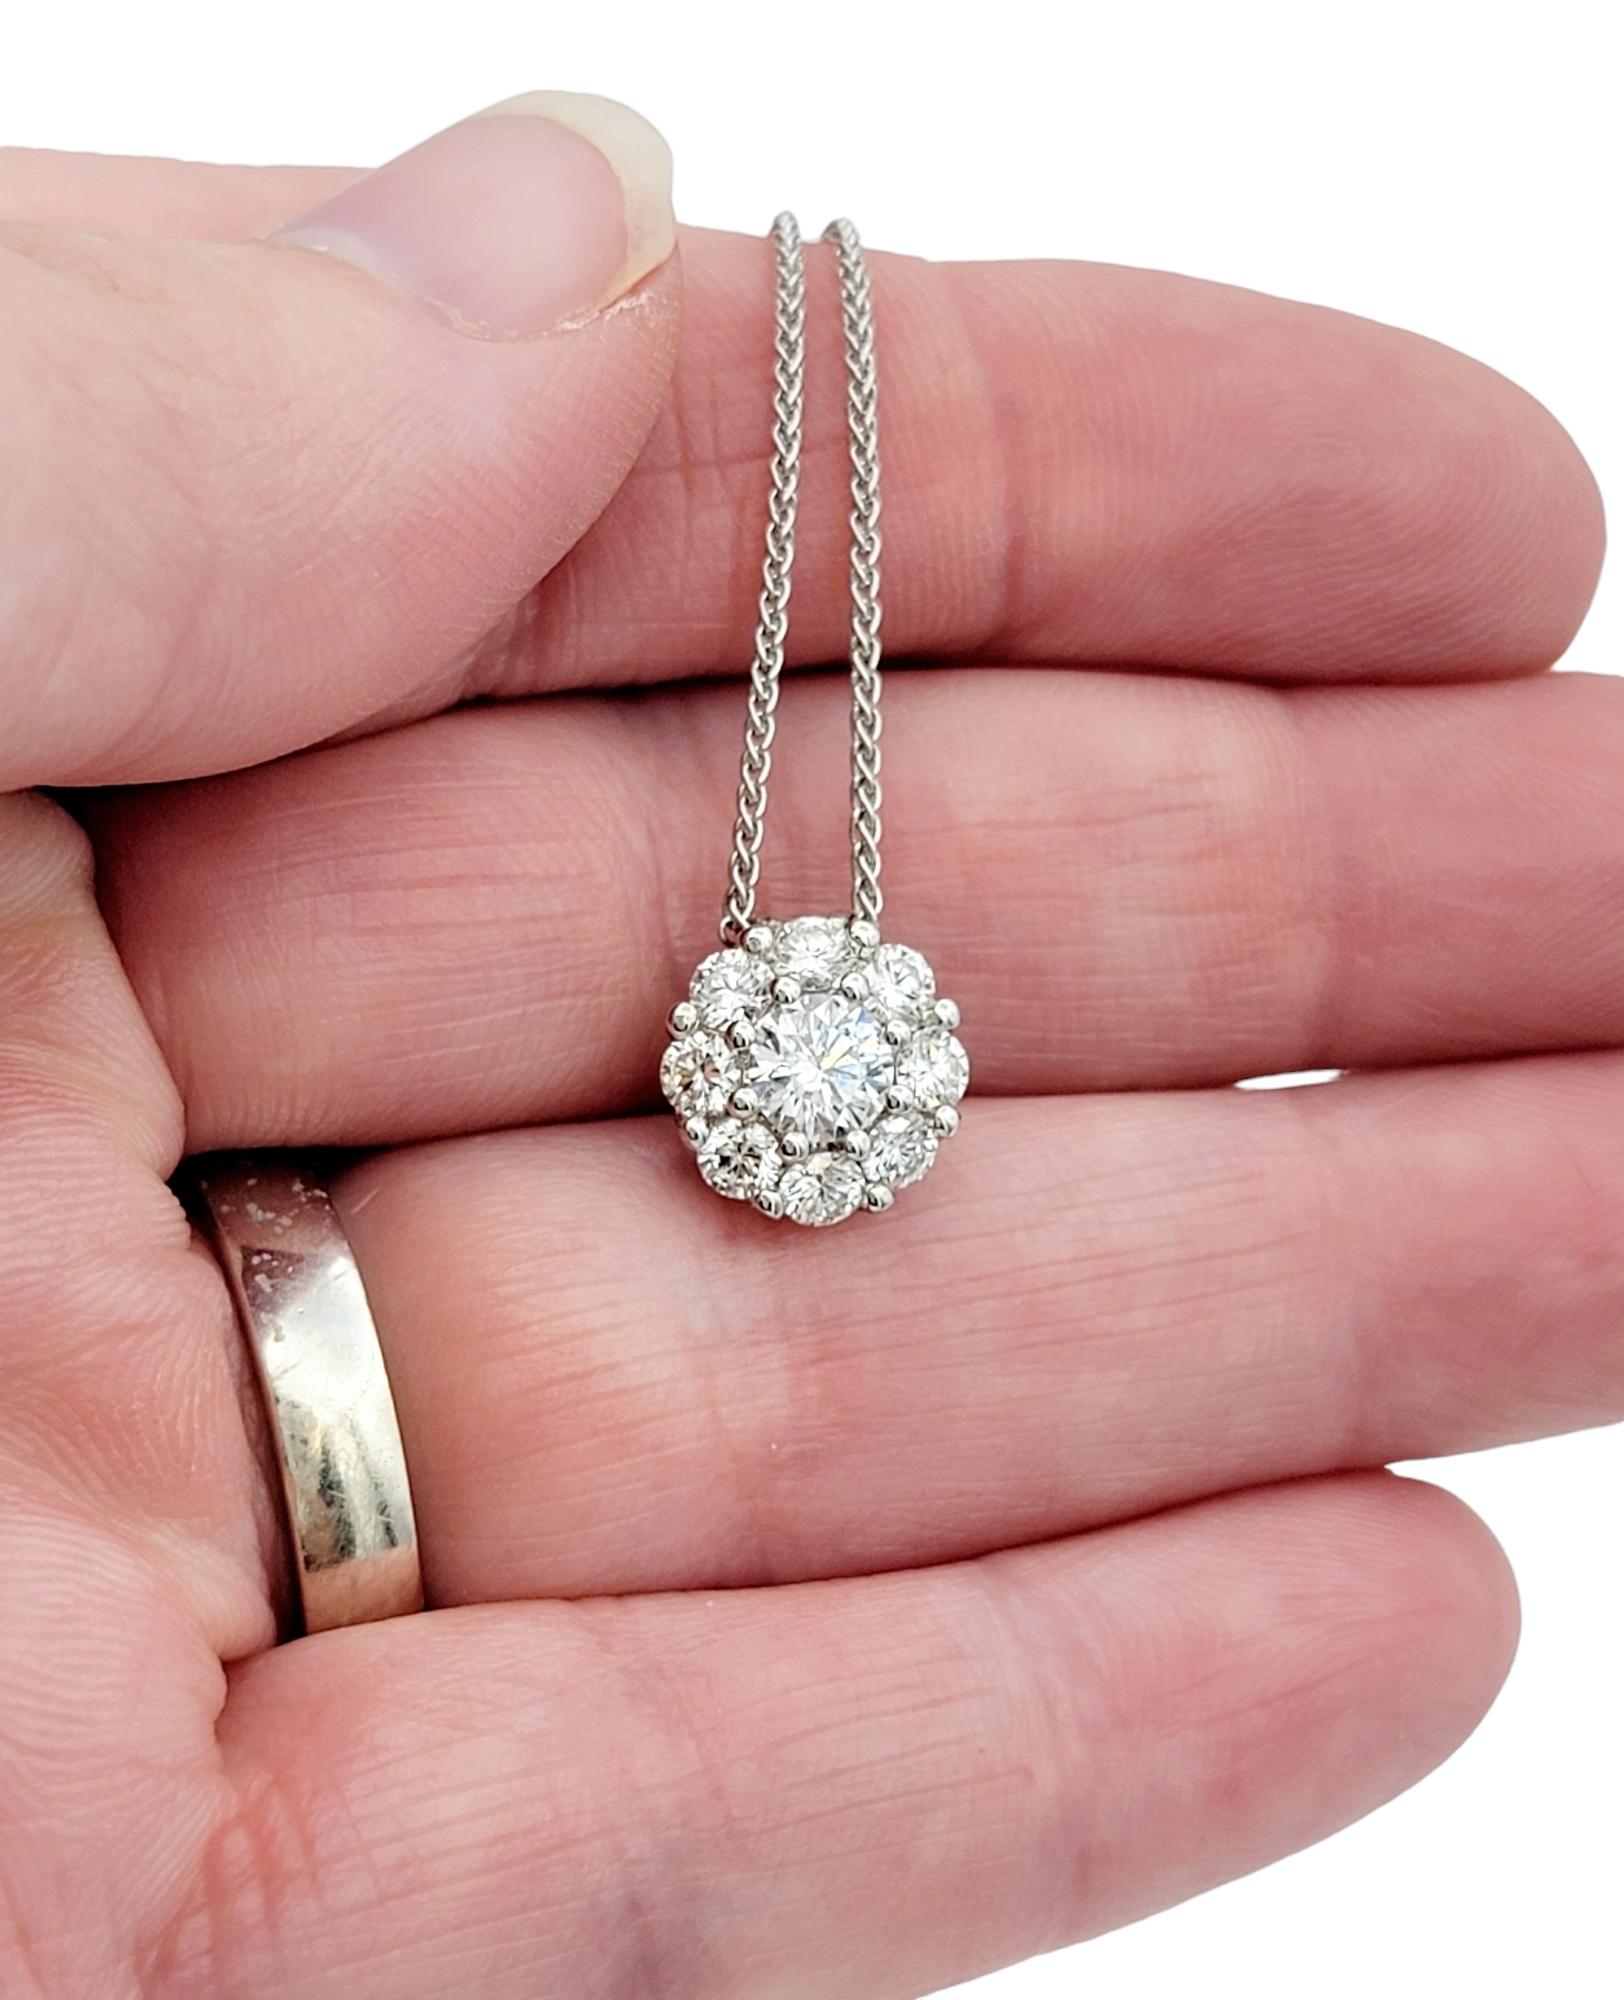  Round Diamond Halo Pendant Necklace with Wheat Chain in 18 Karat White Gold For Sale 3